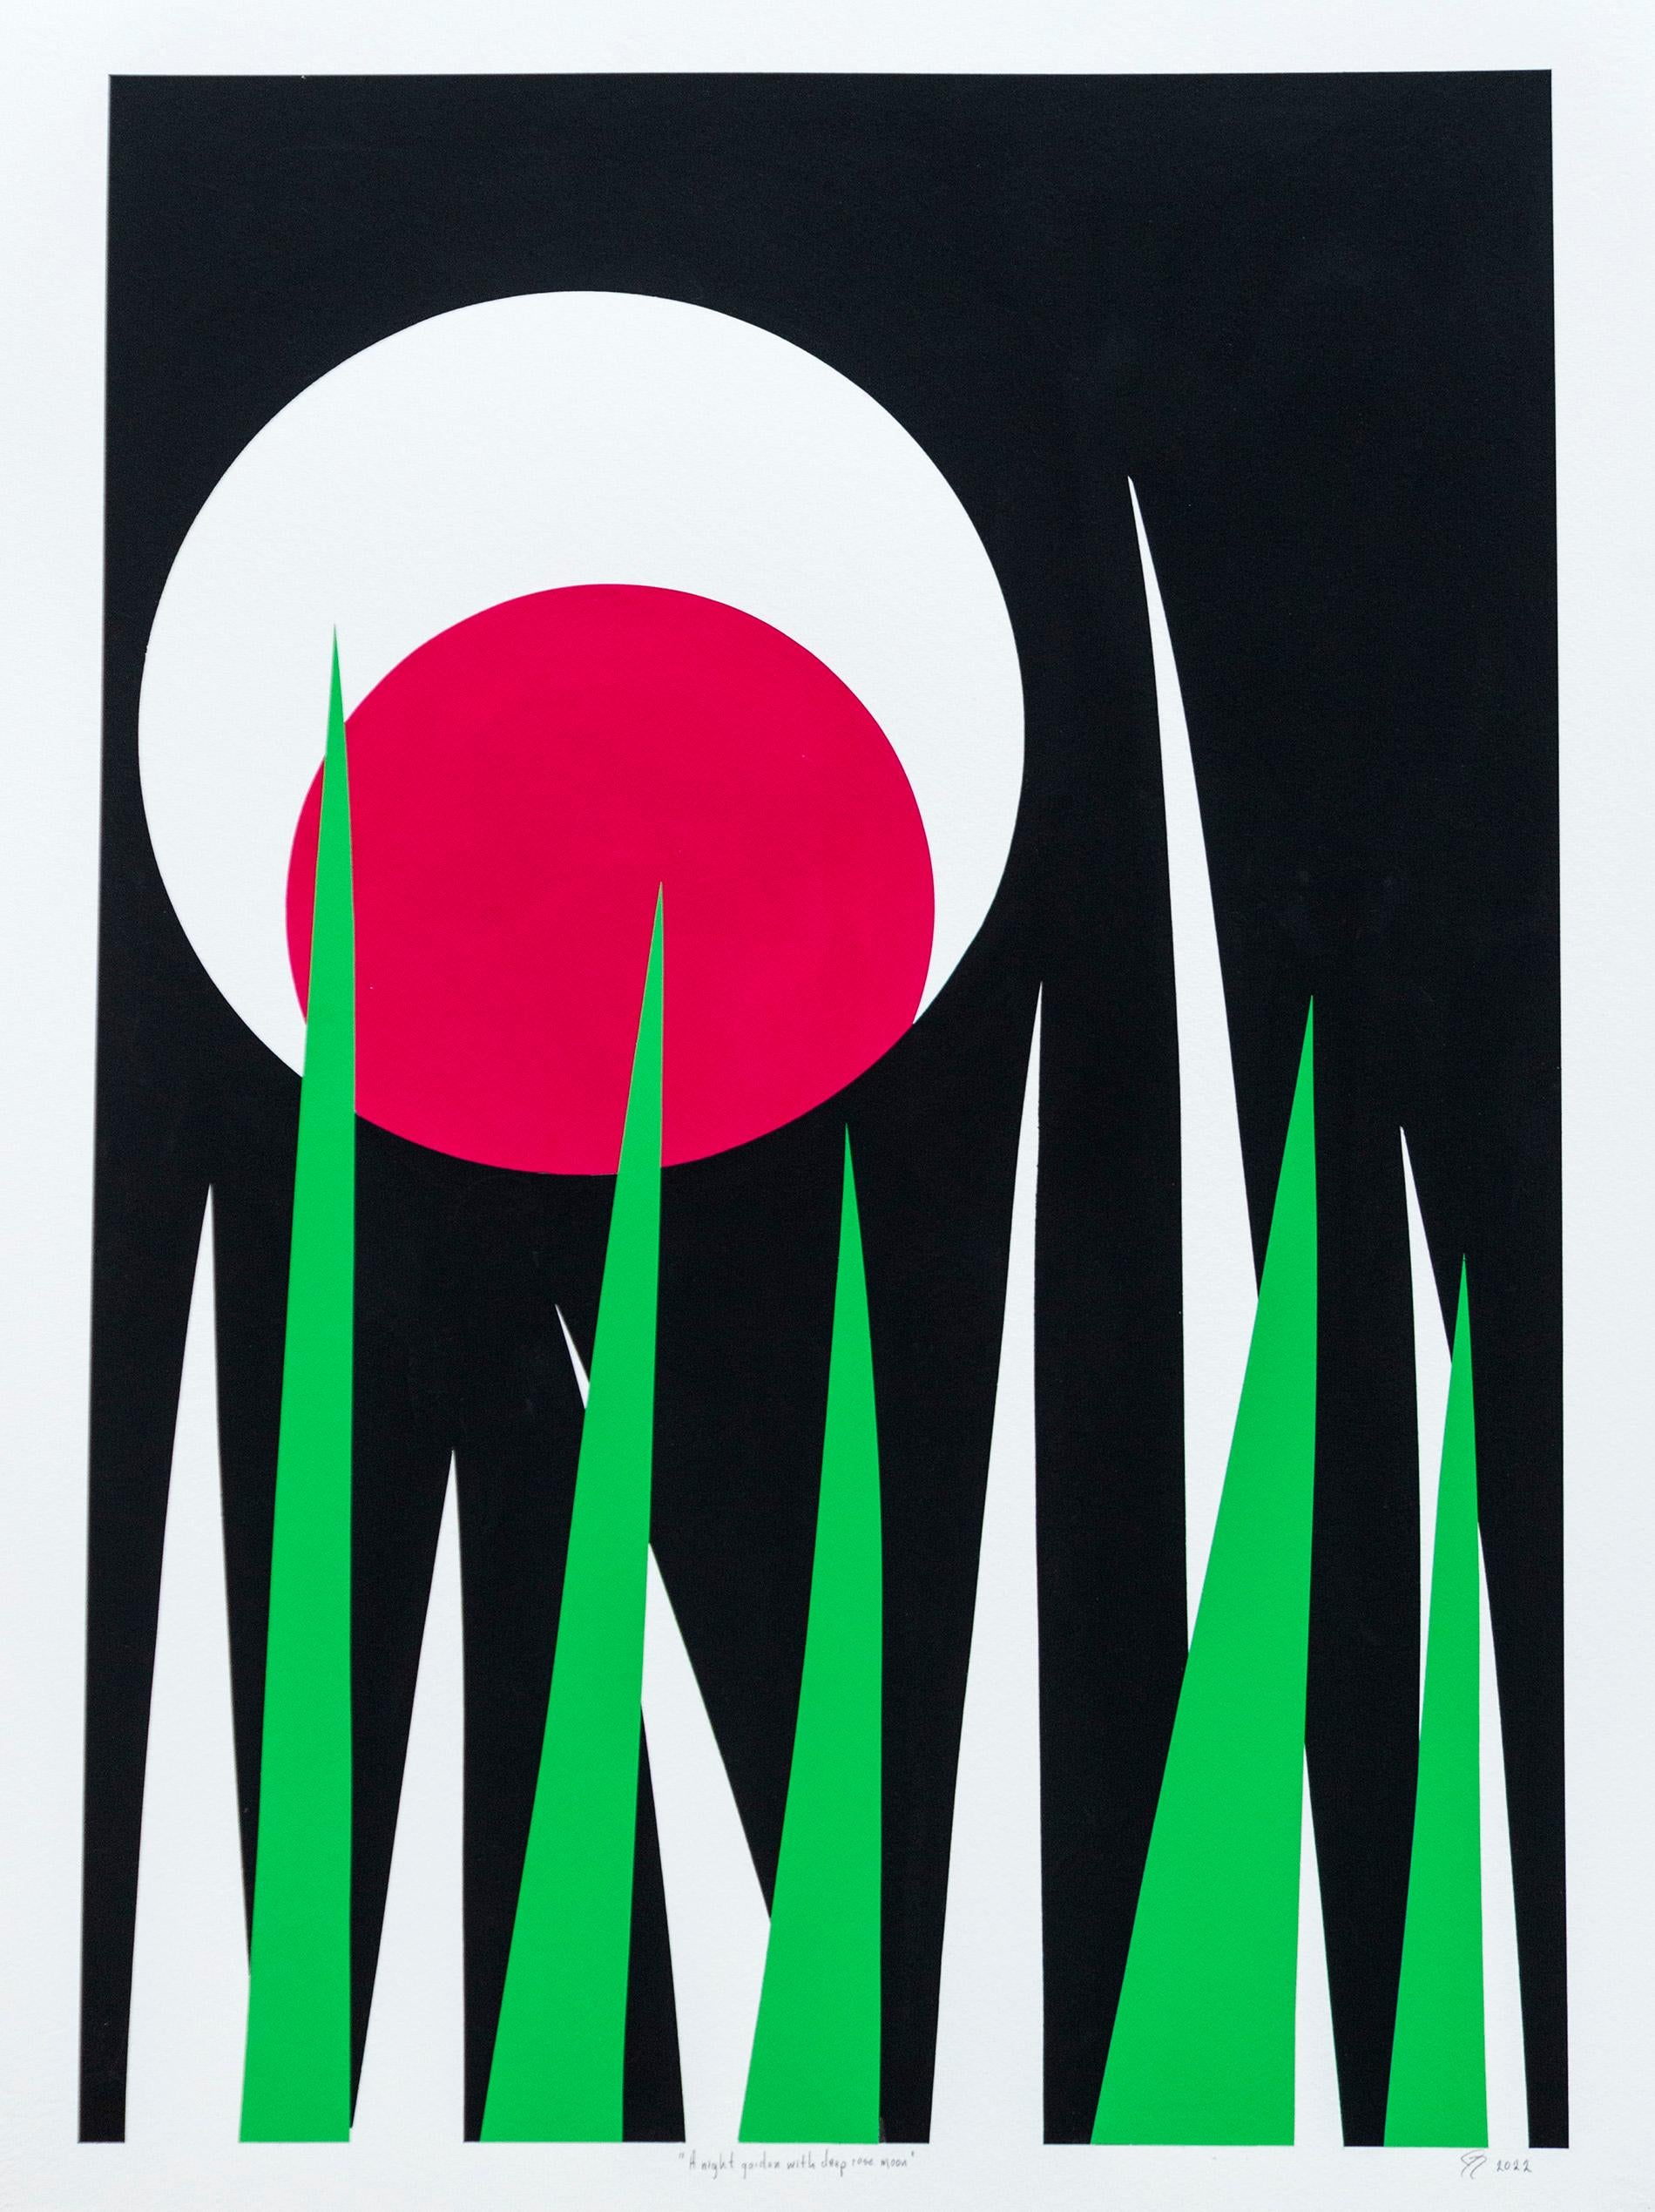 A Night Garden with Deep Rose Moon  - bold, minimal, abstract, acrylic on paper - Painting by Aron Hill